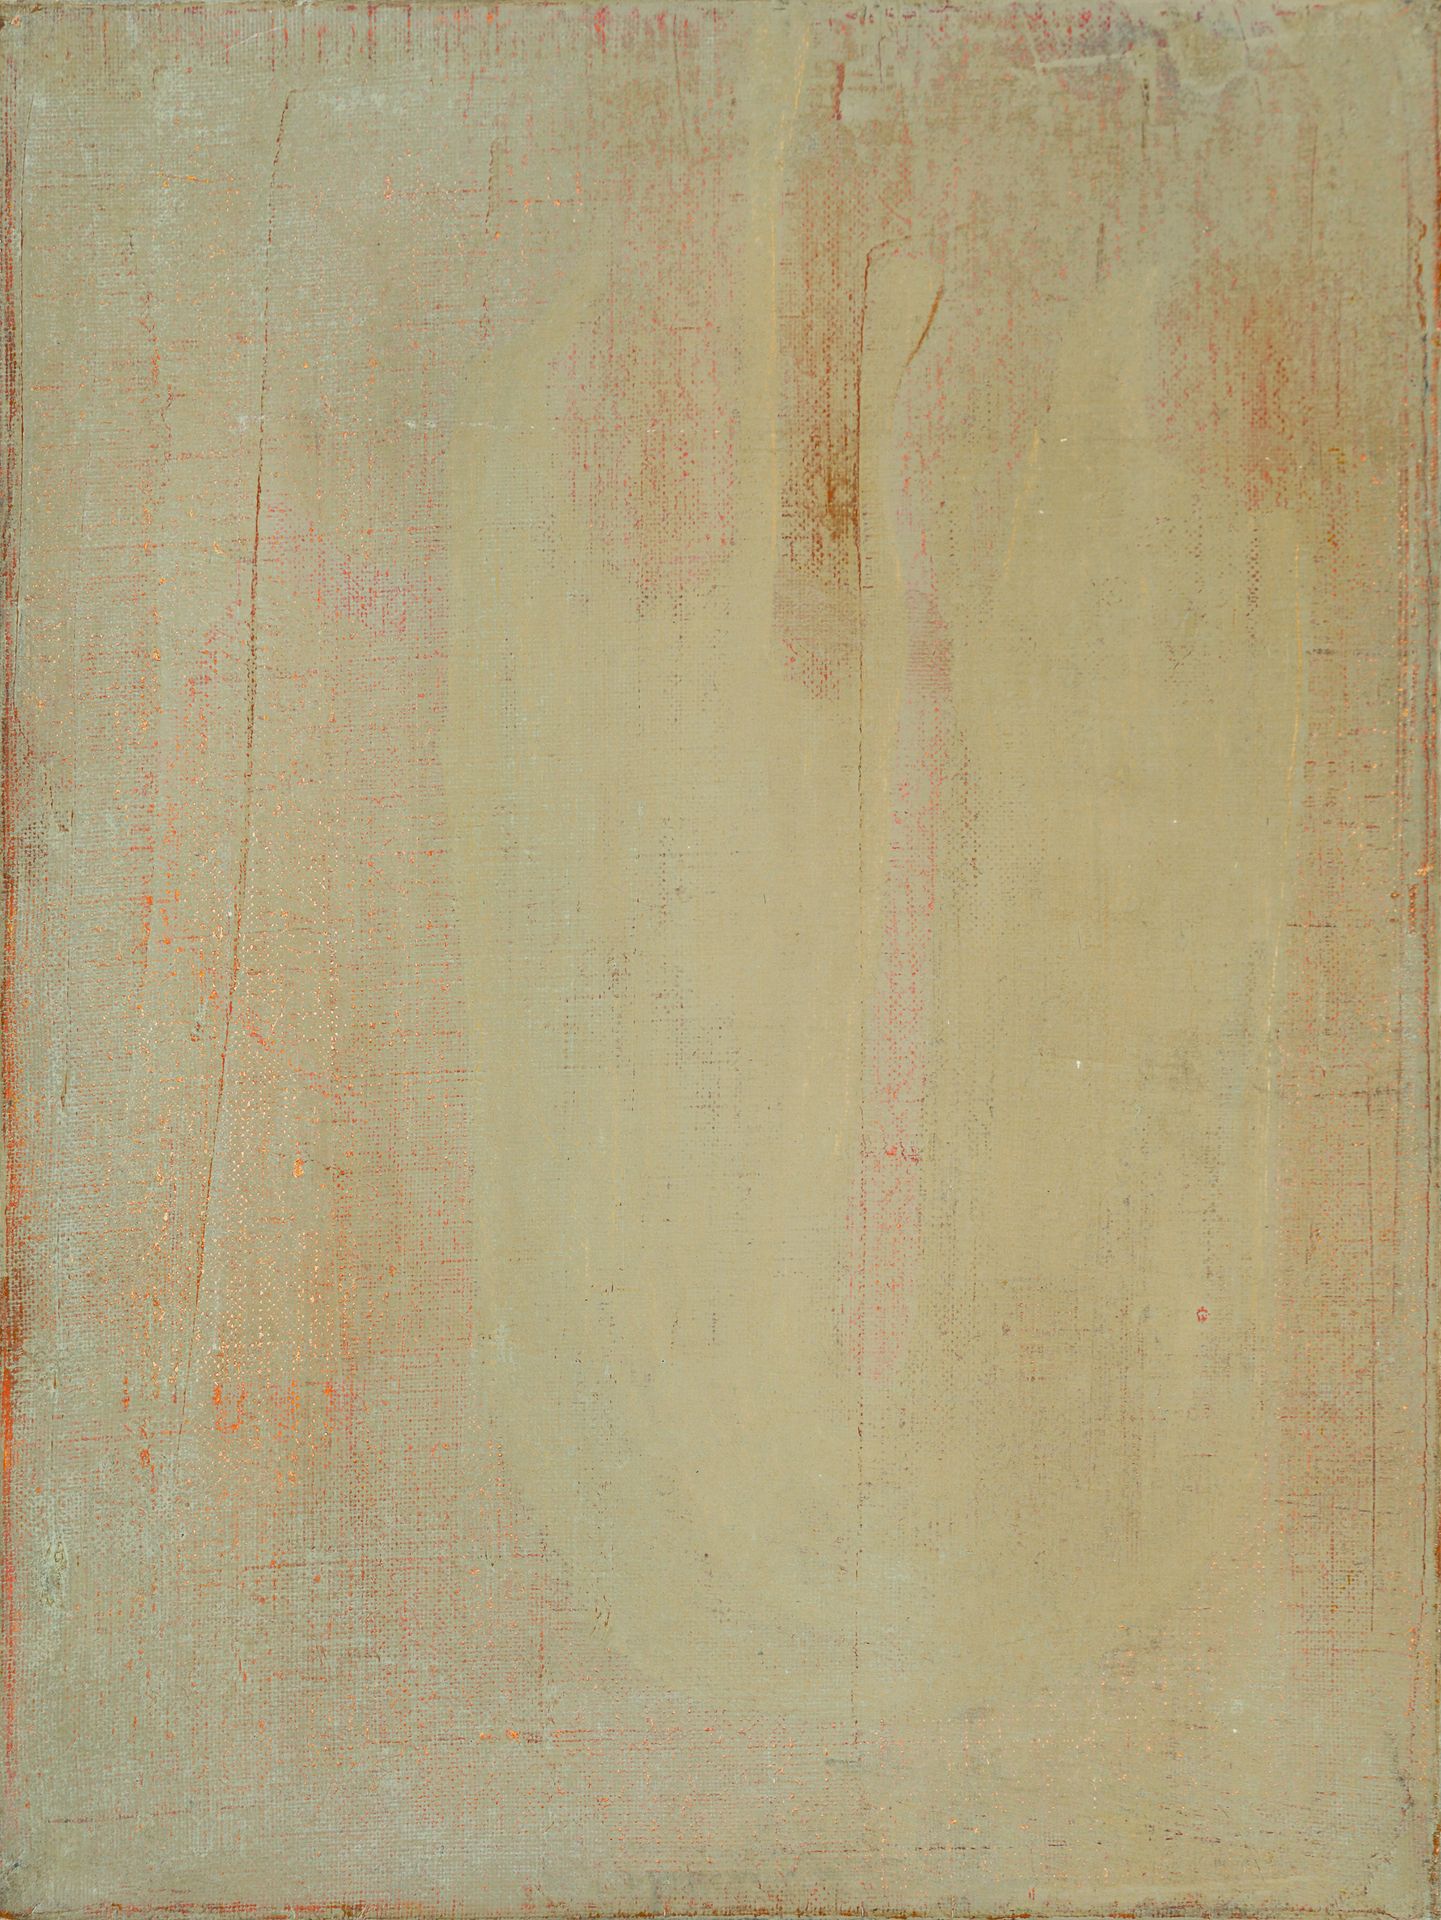 Bohatsch, Erwin Abstraction II, 1993
Oil on canvas
Verso signed and dated
40 x 3&hellip;